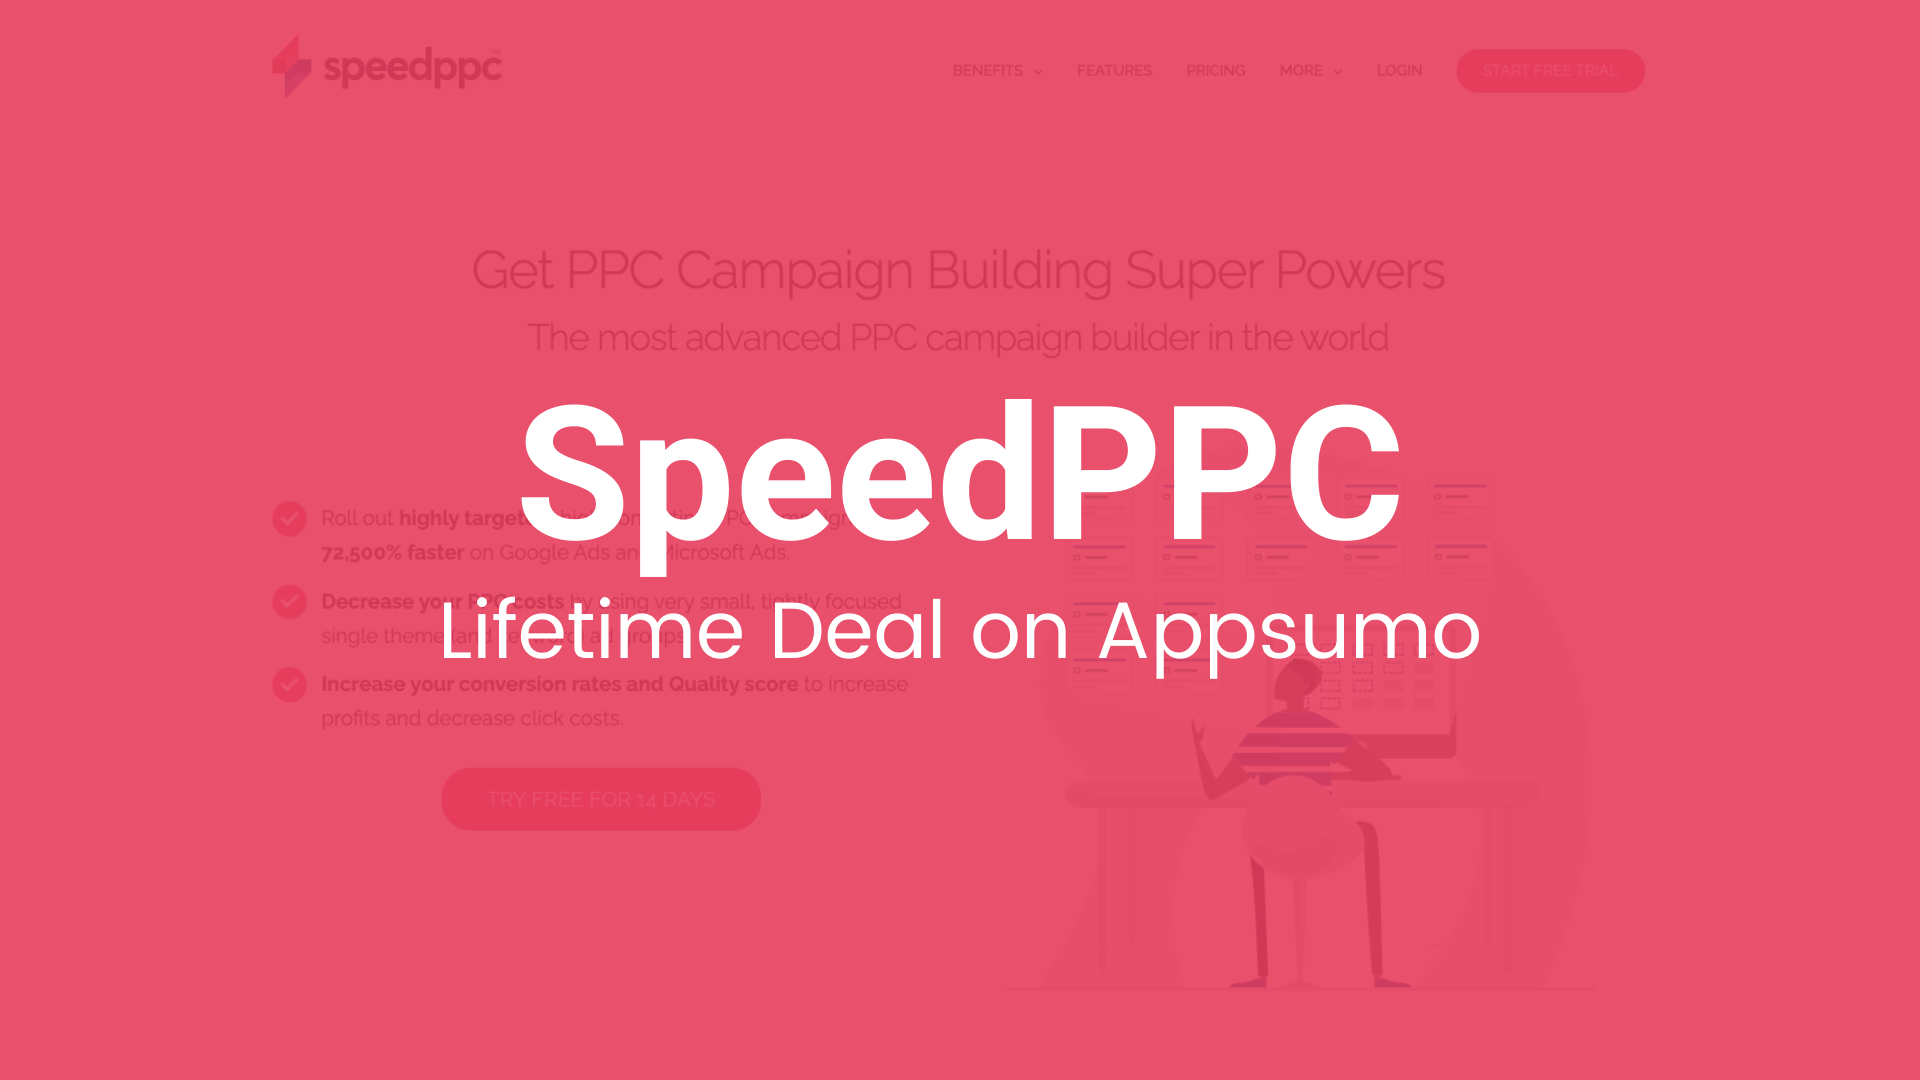 SpeedPPC: Easily Build Hyper-Targeted, High-Converting Ad Campaigns That Convert